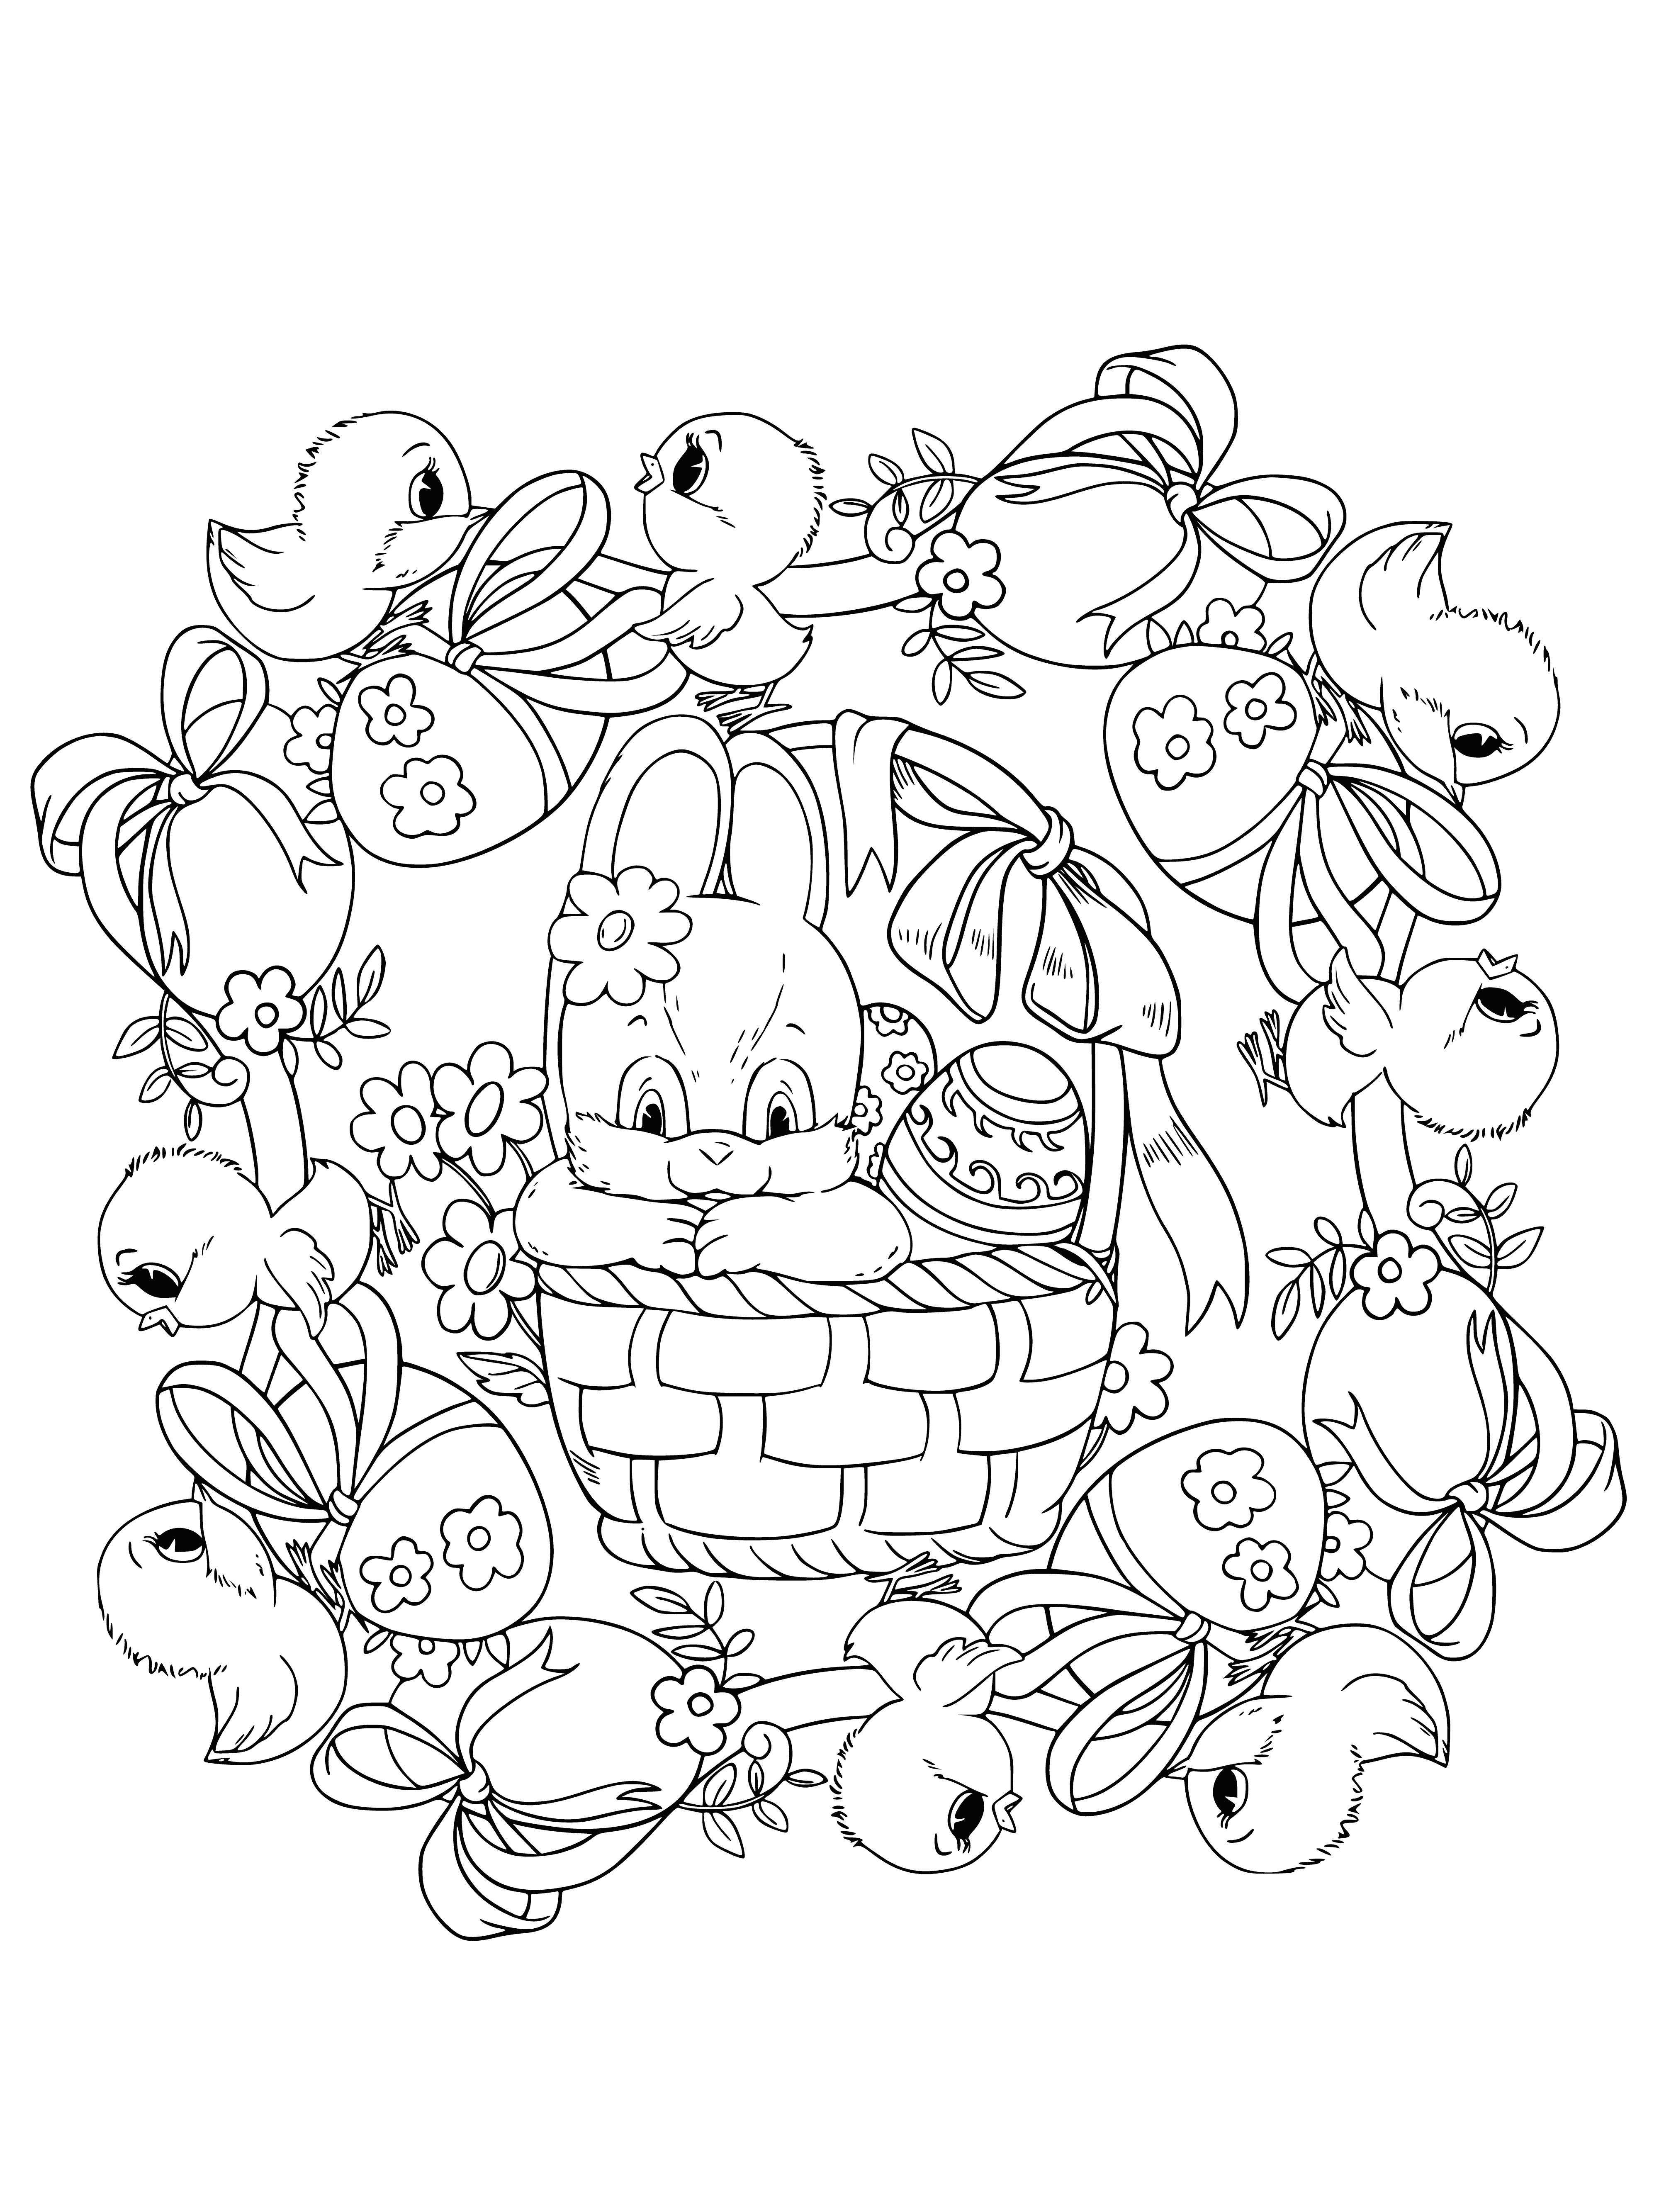 coloring page: The Easter bunny sits in a basket of eggs - some pink, blue, & yellow - smiling & holding a carrot.